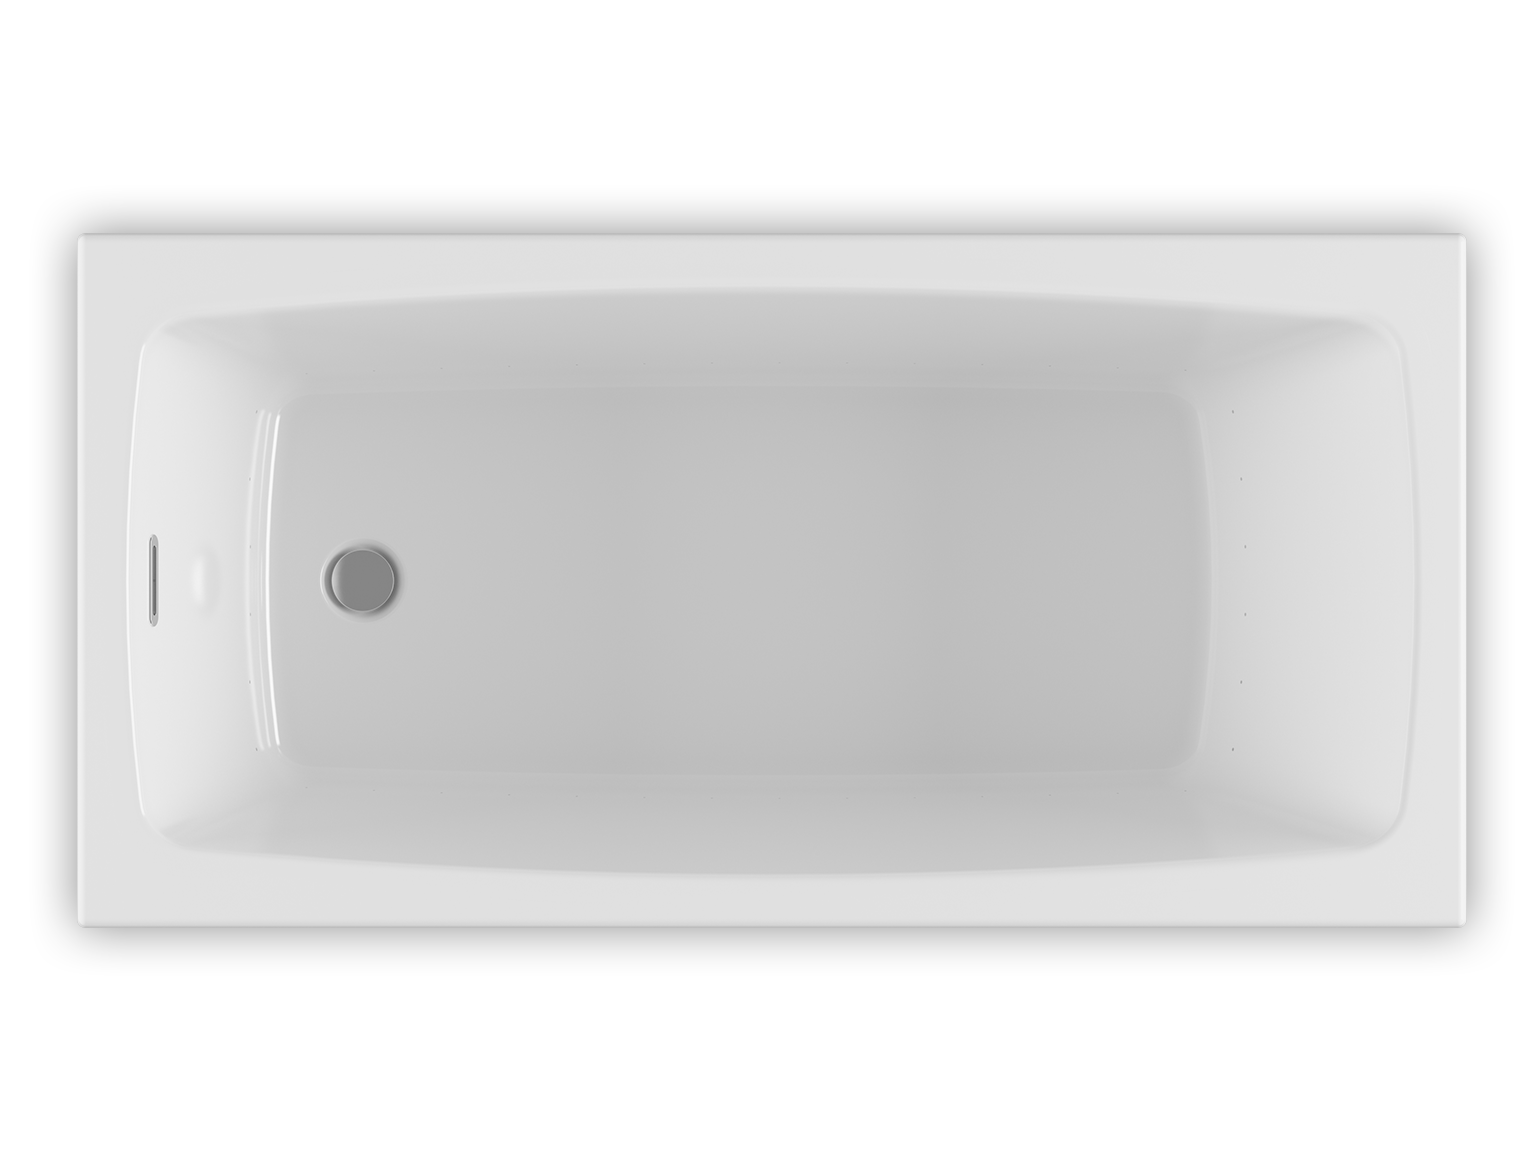 Modern Bathtub Top View Png | Another Home Image Ideas